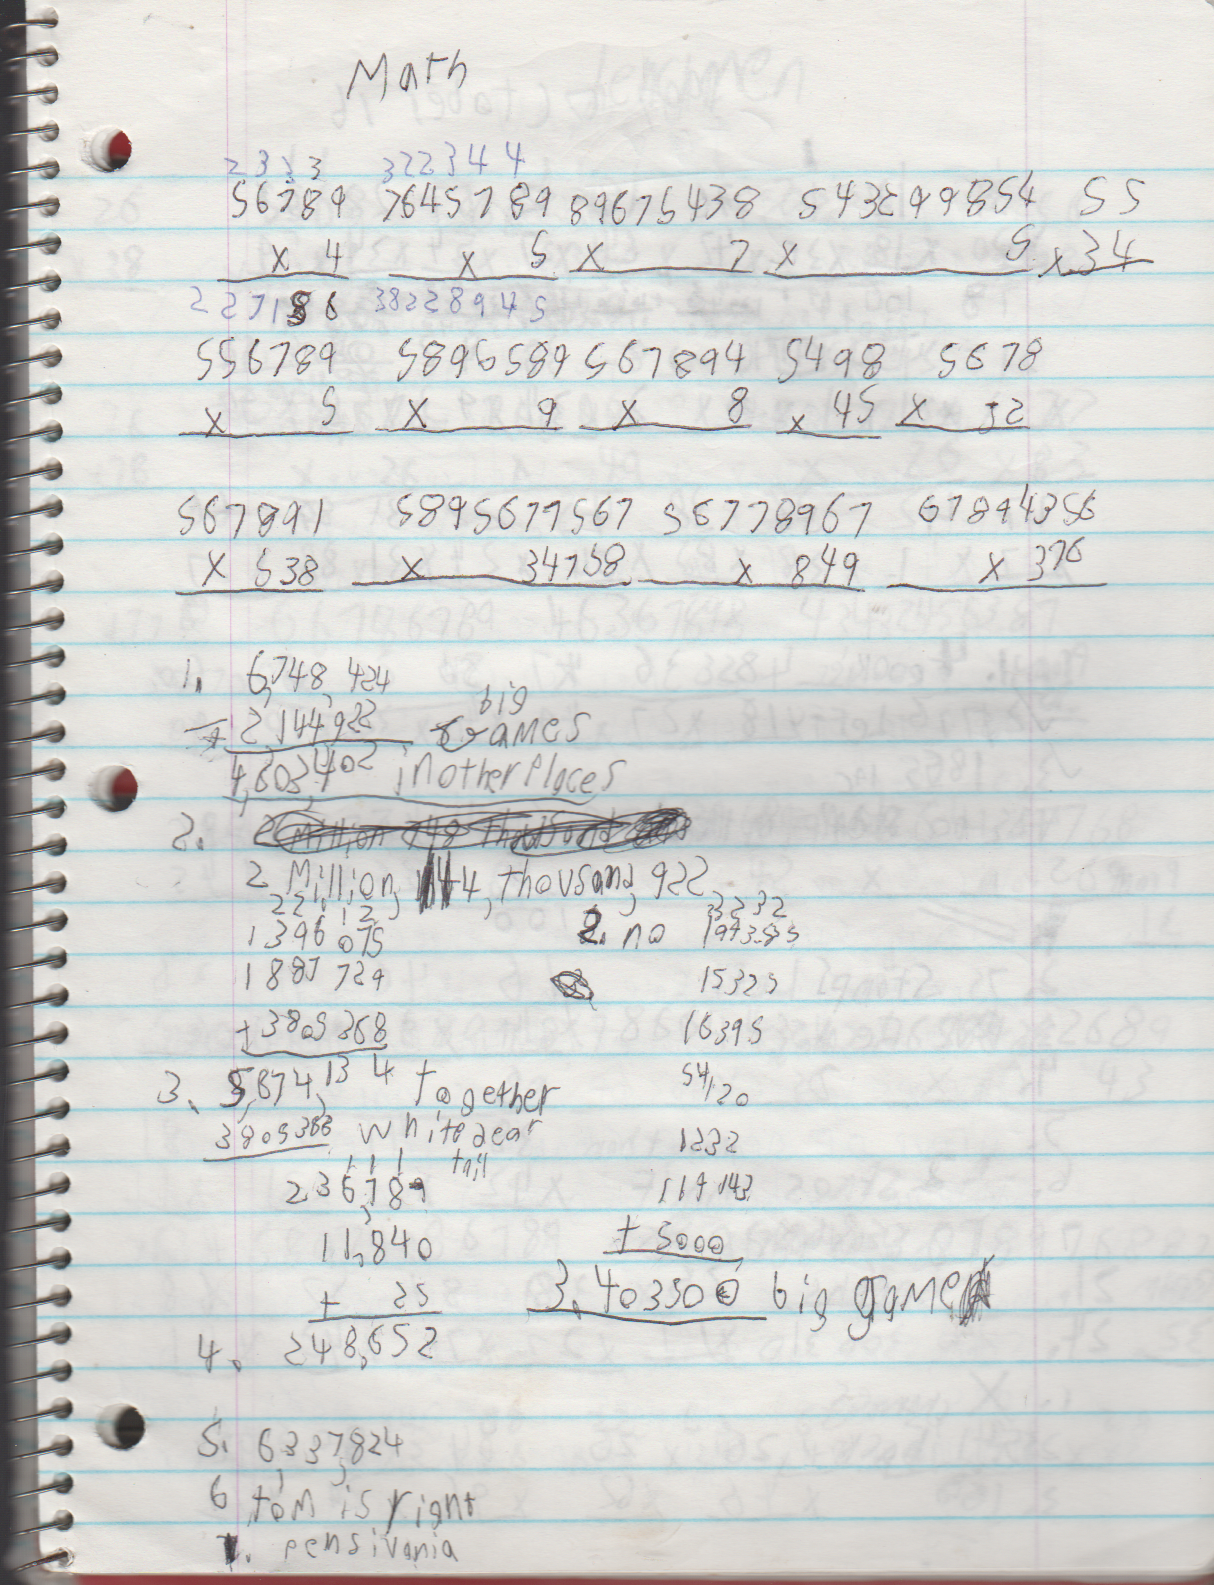 1996-08-18 - Saturday - 11 yr old Joey Arnold's School Book, dates through to 1998 apx, mostly 96, Writings, Drawings, Etc-025.png